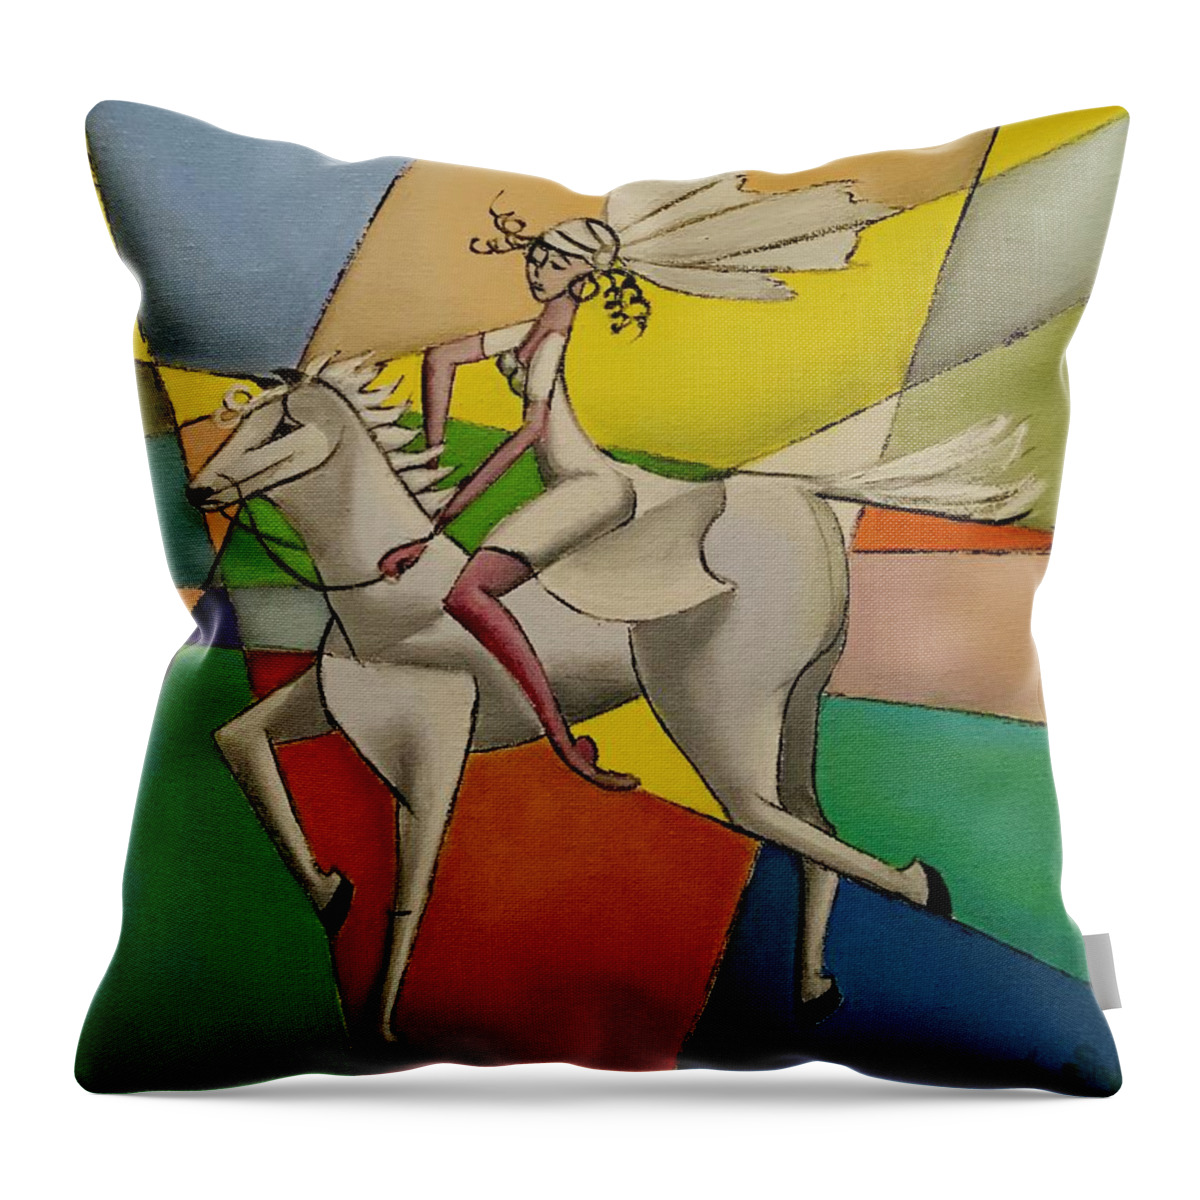 Rider Throw Pillow featuring the painting White Rider by Lana Sylber